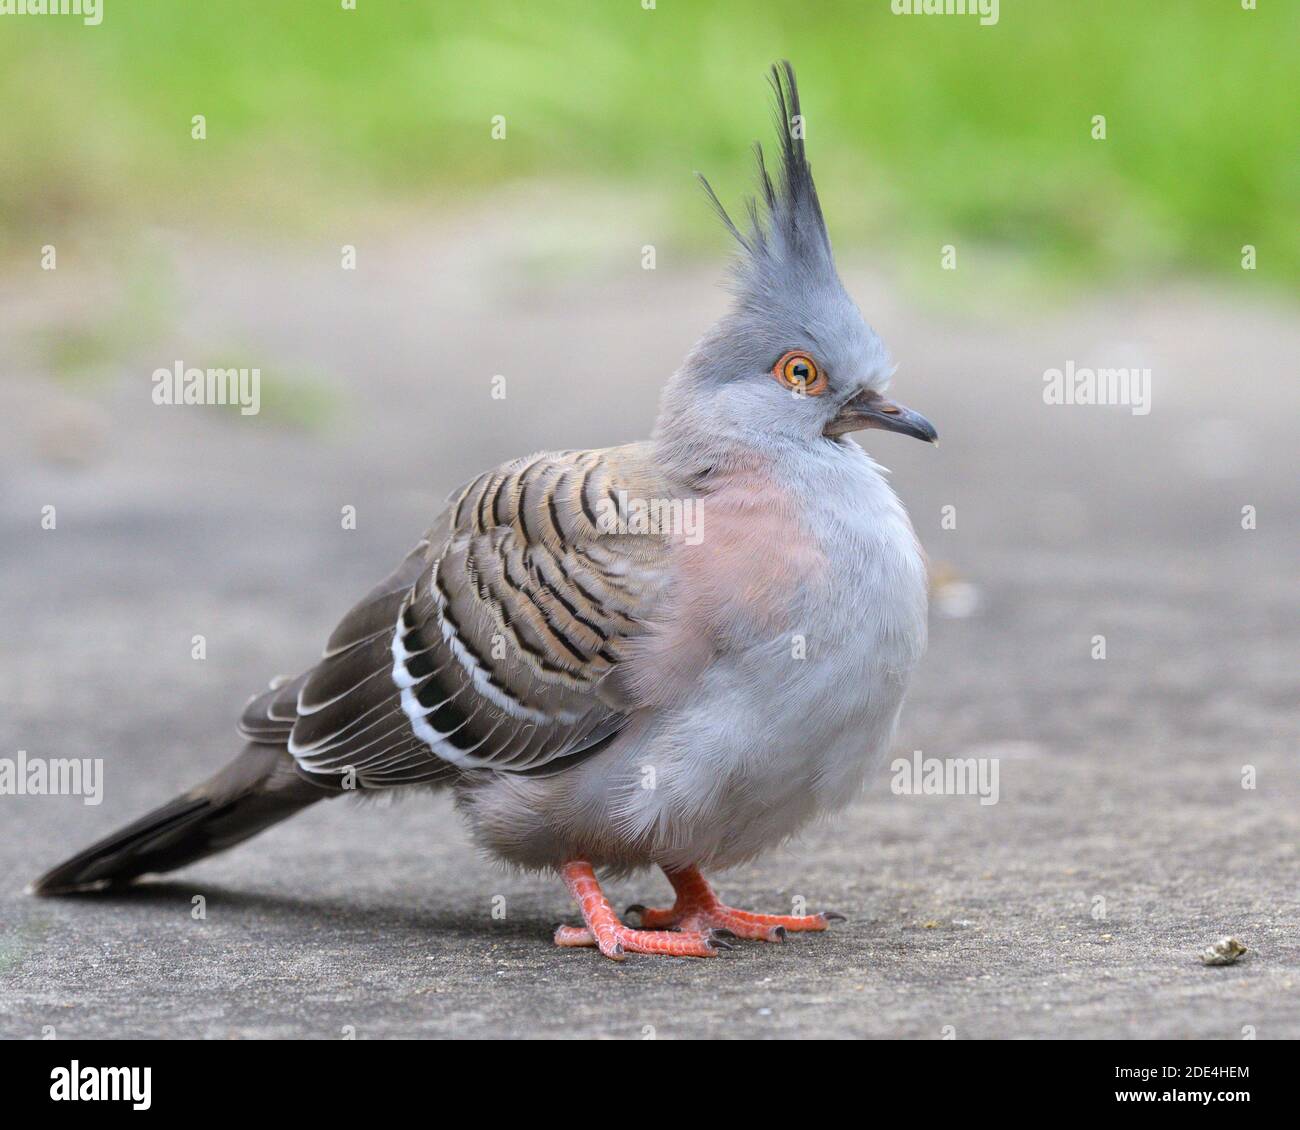 A Crested Pigeon (Ocyphaps lophotes) fledgling standing on the ground soon after leaving the nest in NSW, Australia Stock Photo